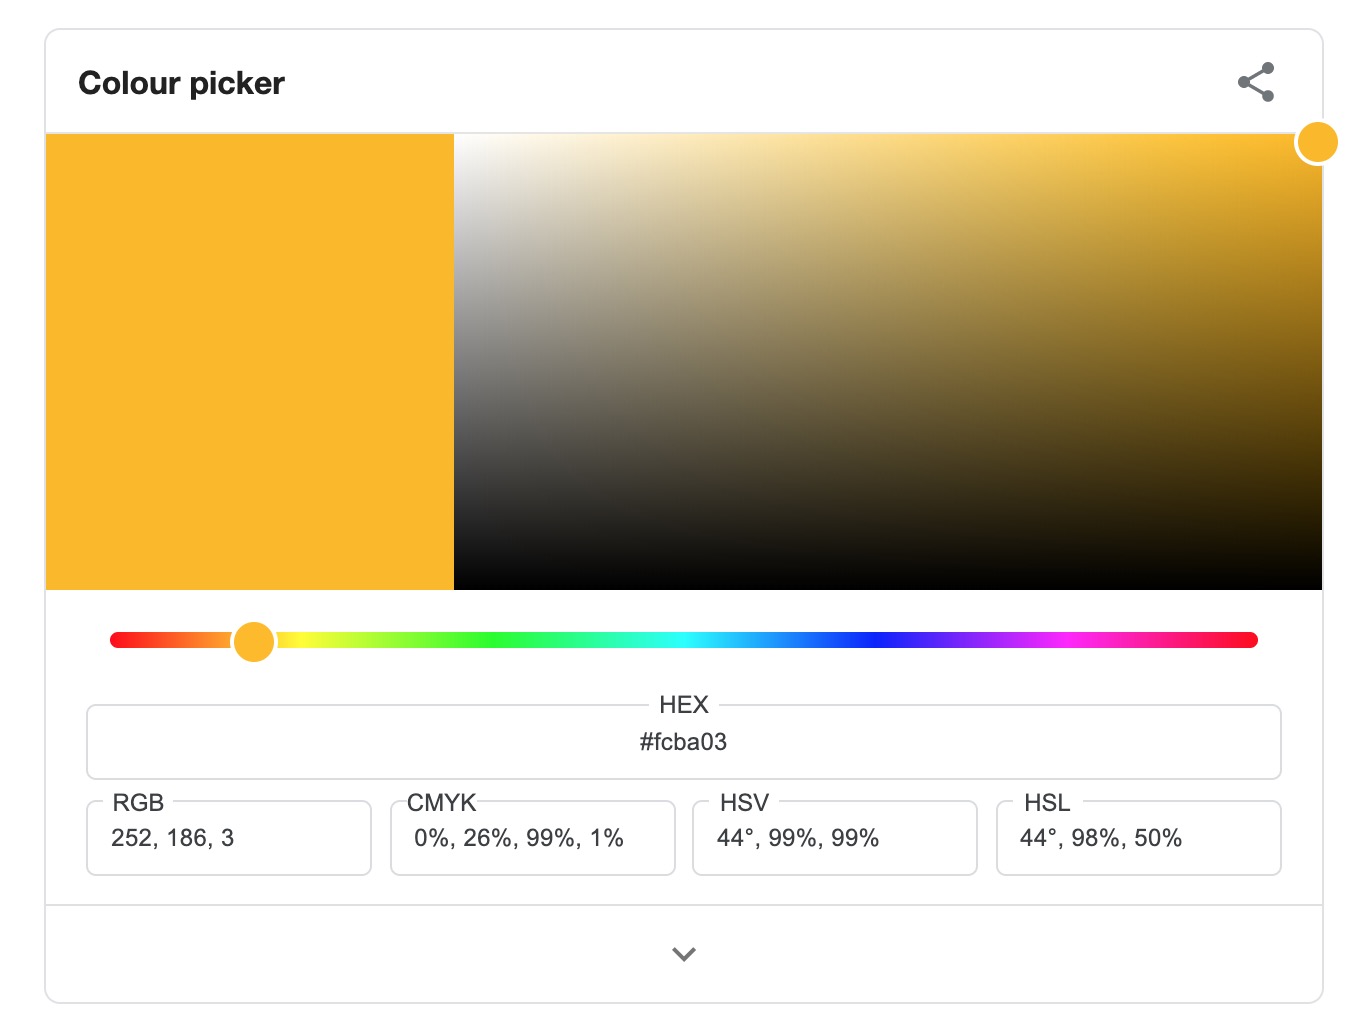 The color picker on Google